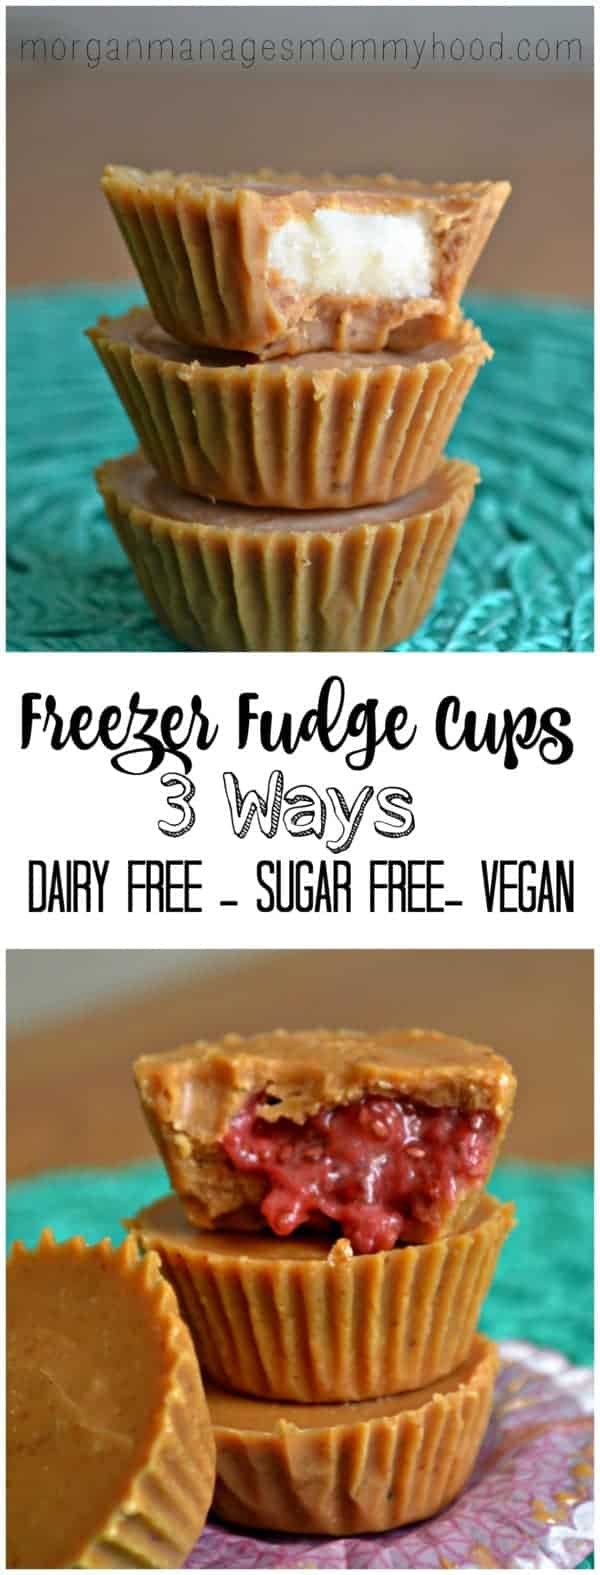 Freezer Fudge cups are Refined Sugar Free and Dairy Free treats you and your kids are sure to love!